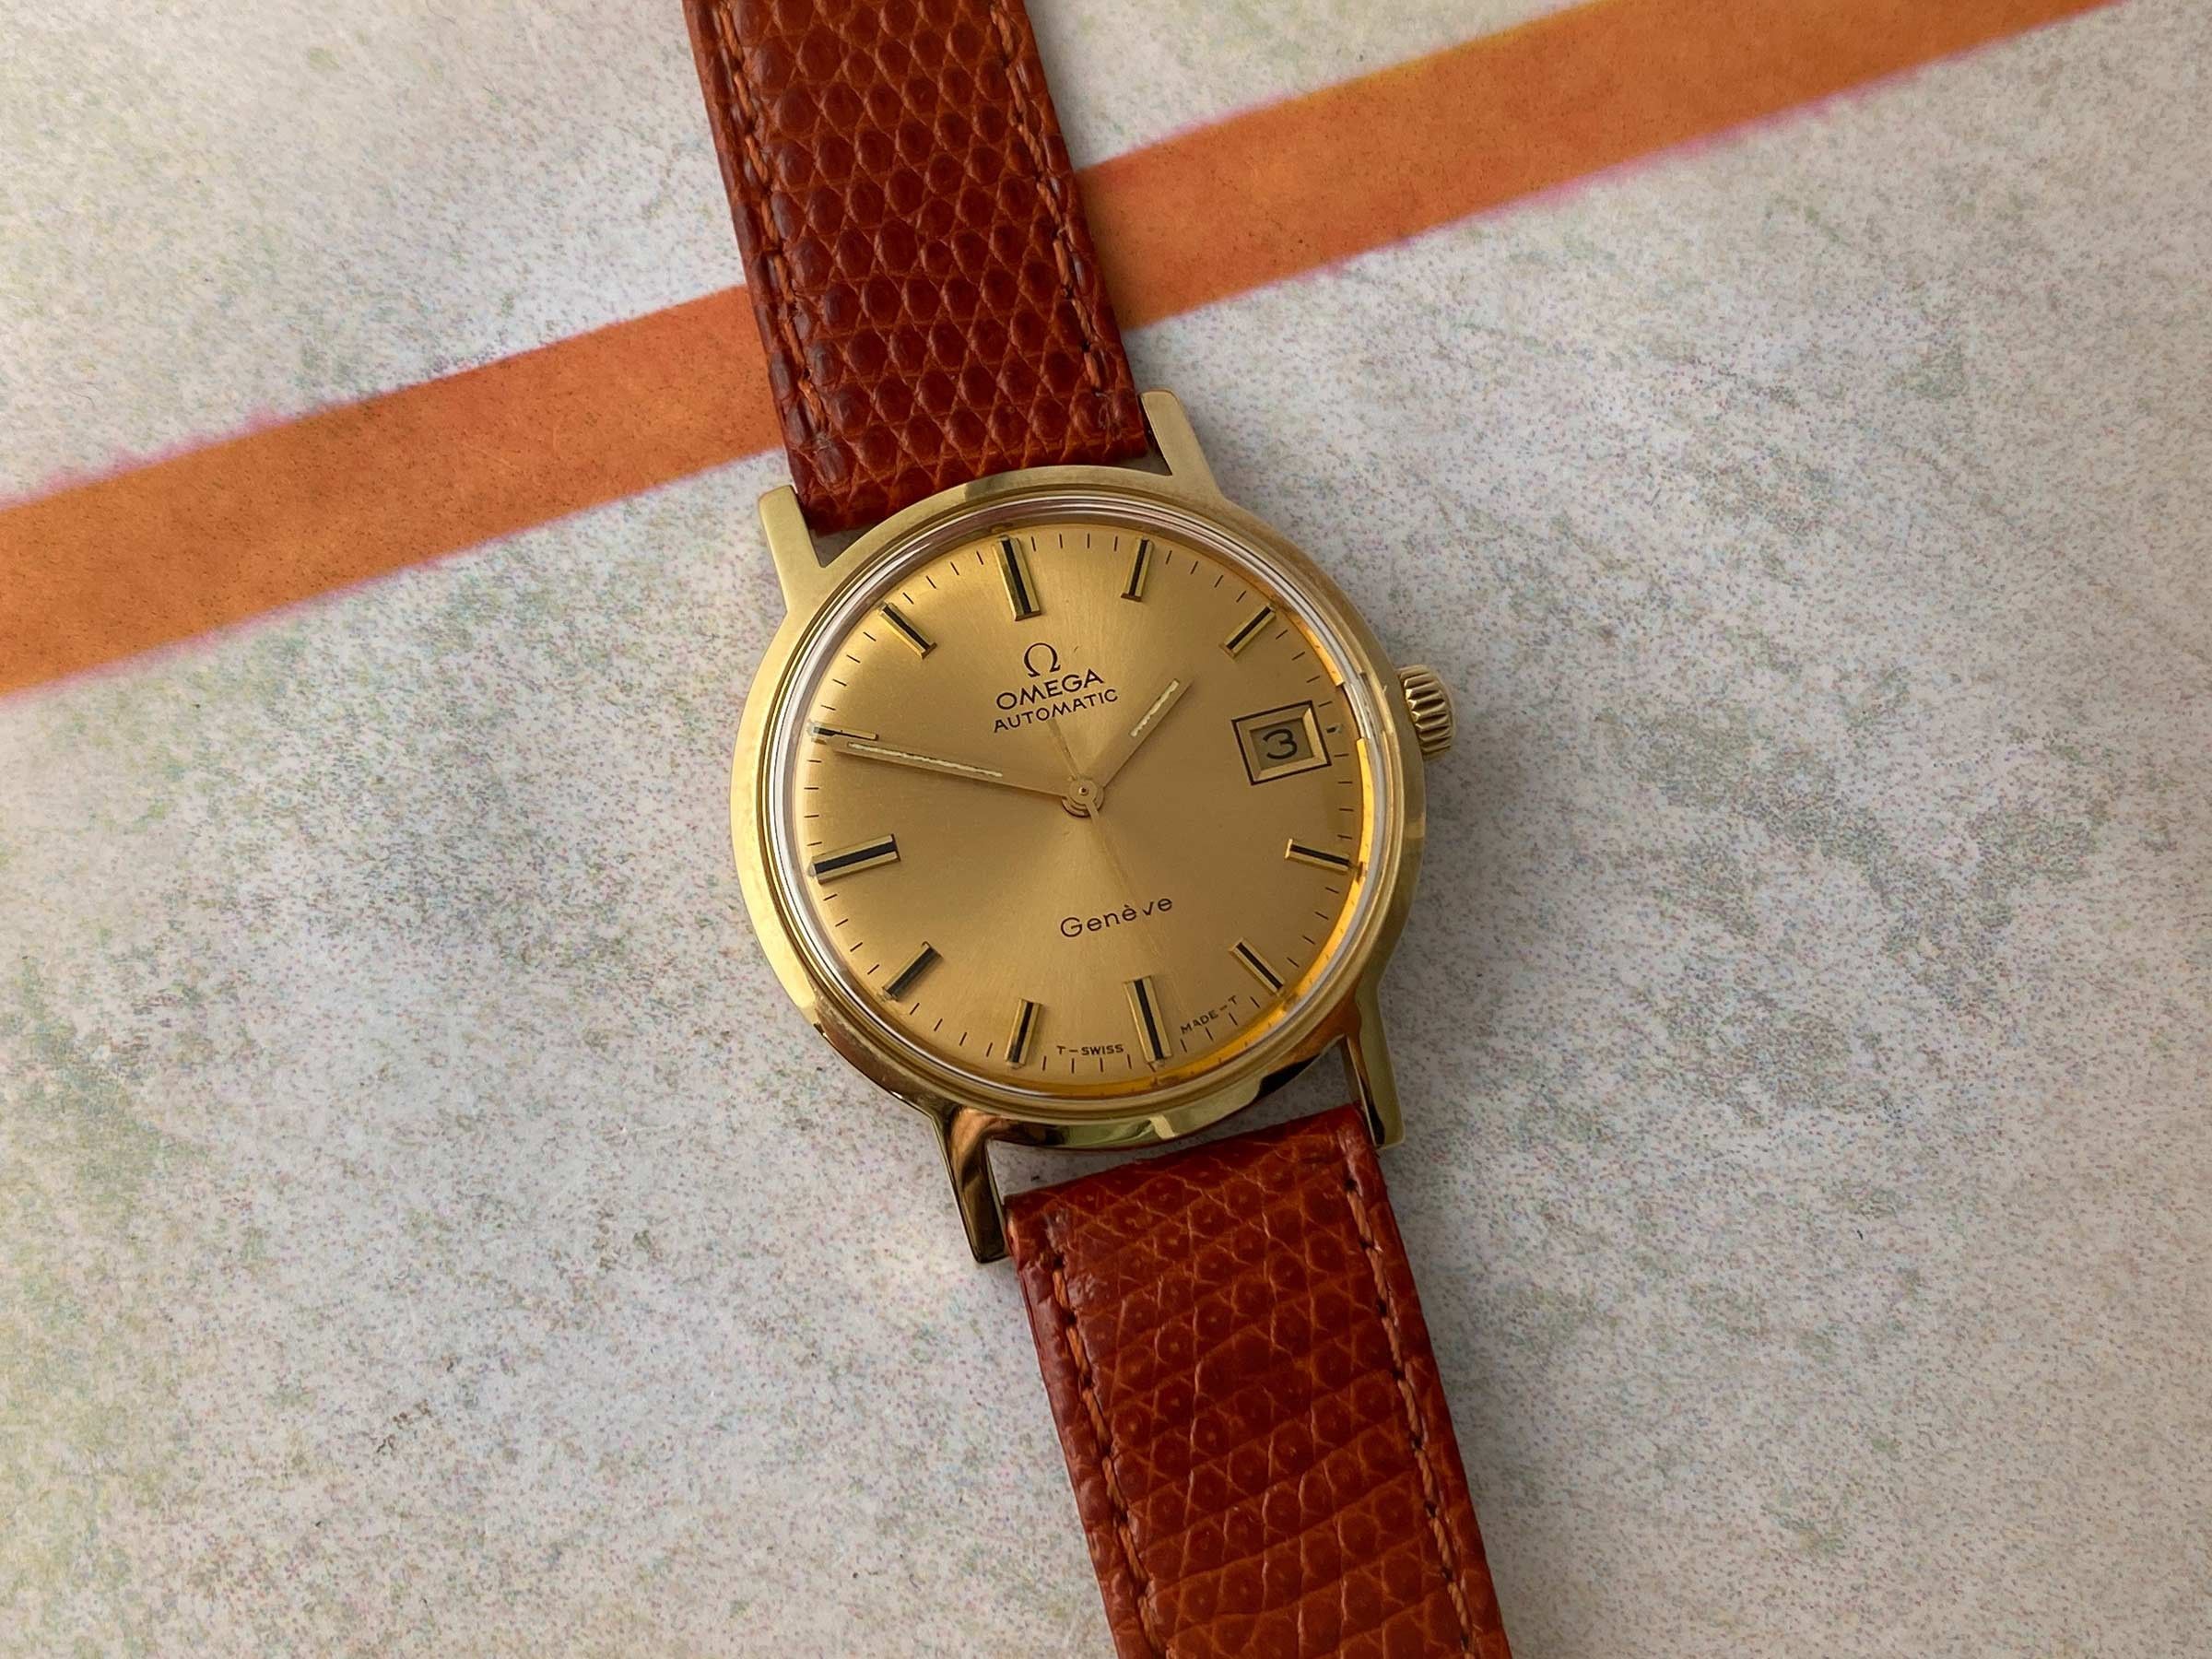 OMEGA GENÈVE Vintage swiss automatic watch GOLD 18K Cal. 565 Ref. 166.070  *** BEAUTIFUL *** Omega Vintage watches - Watches83